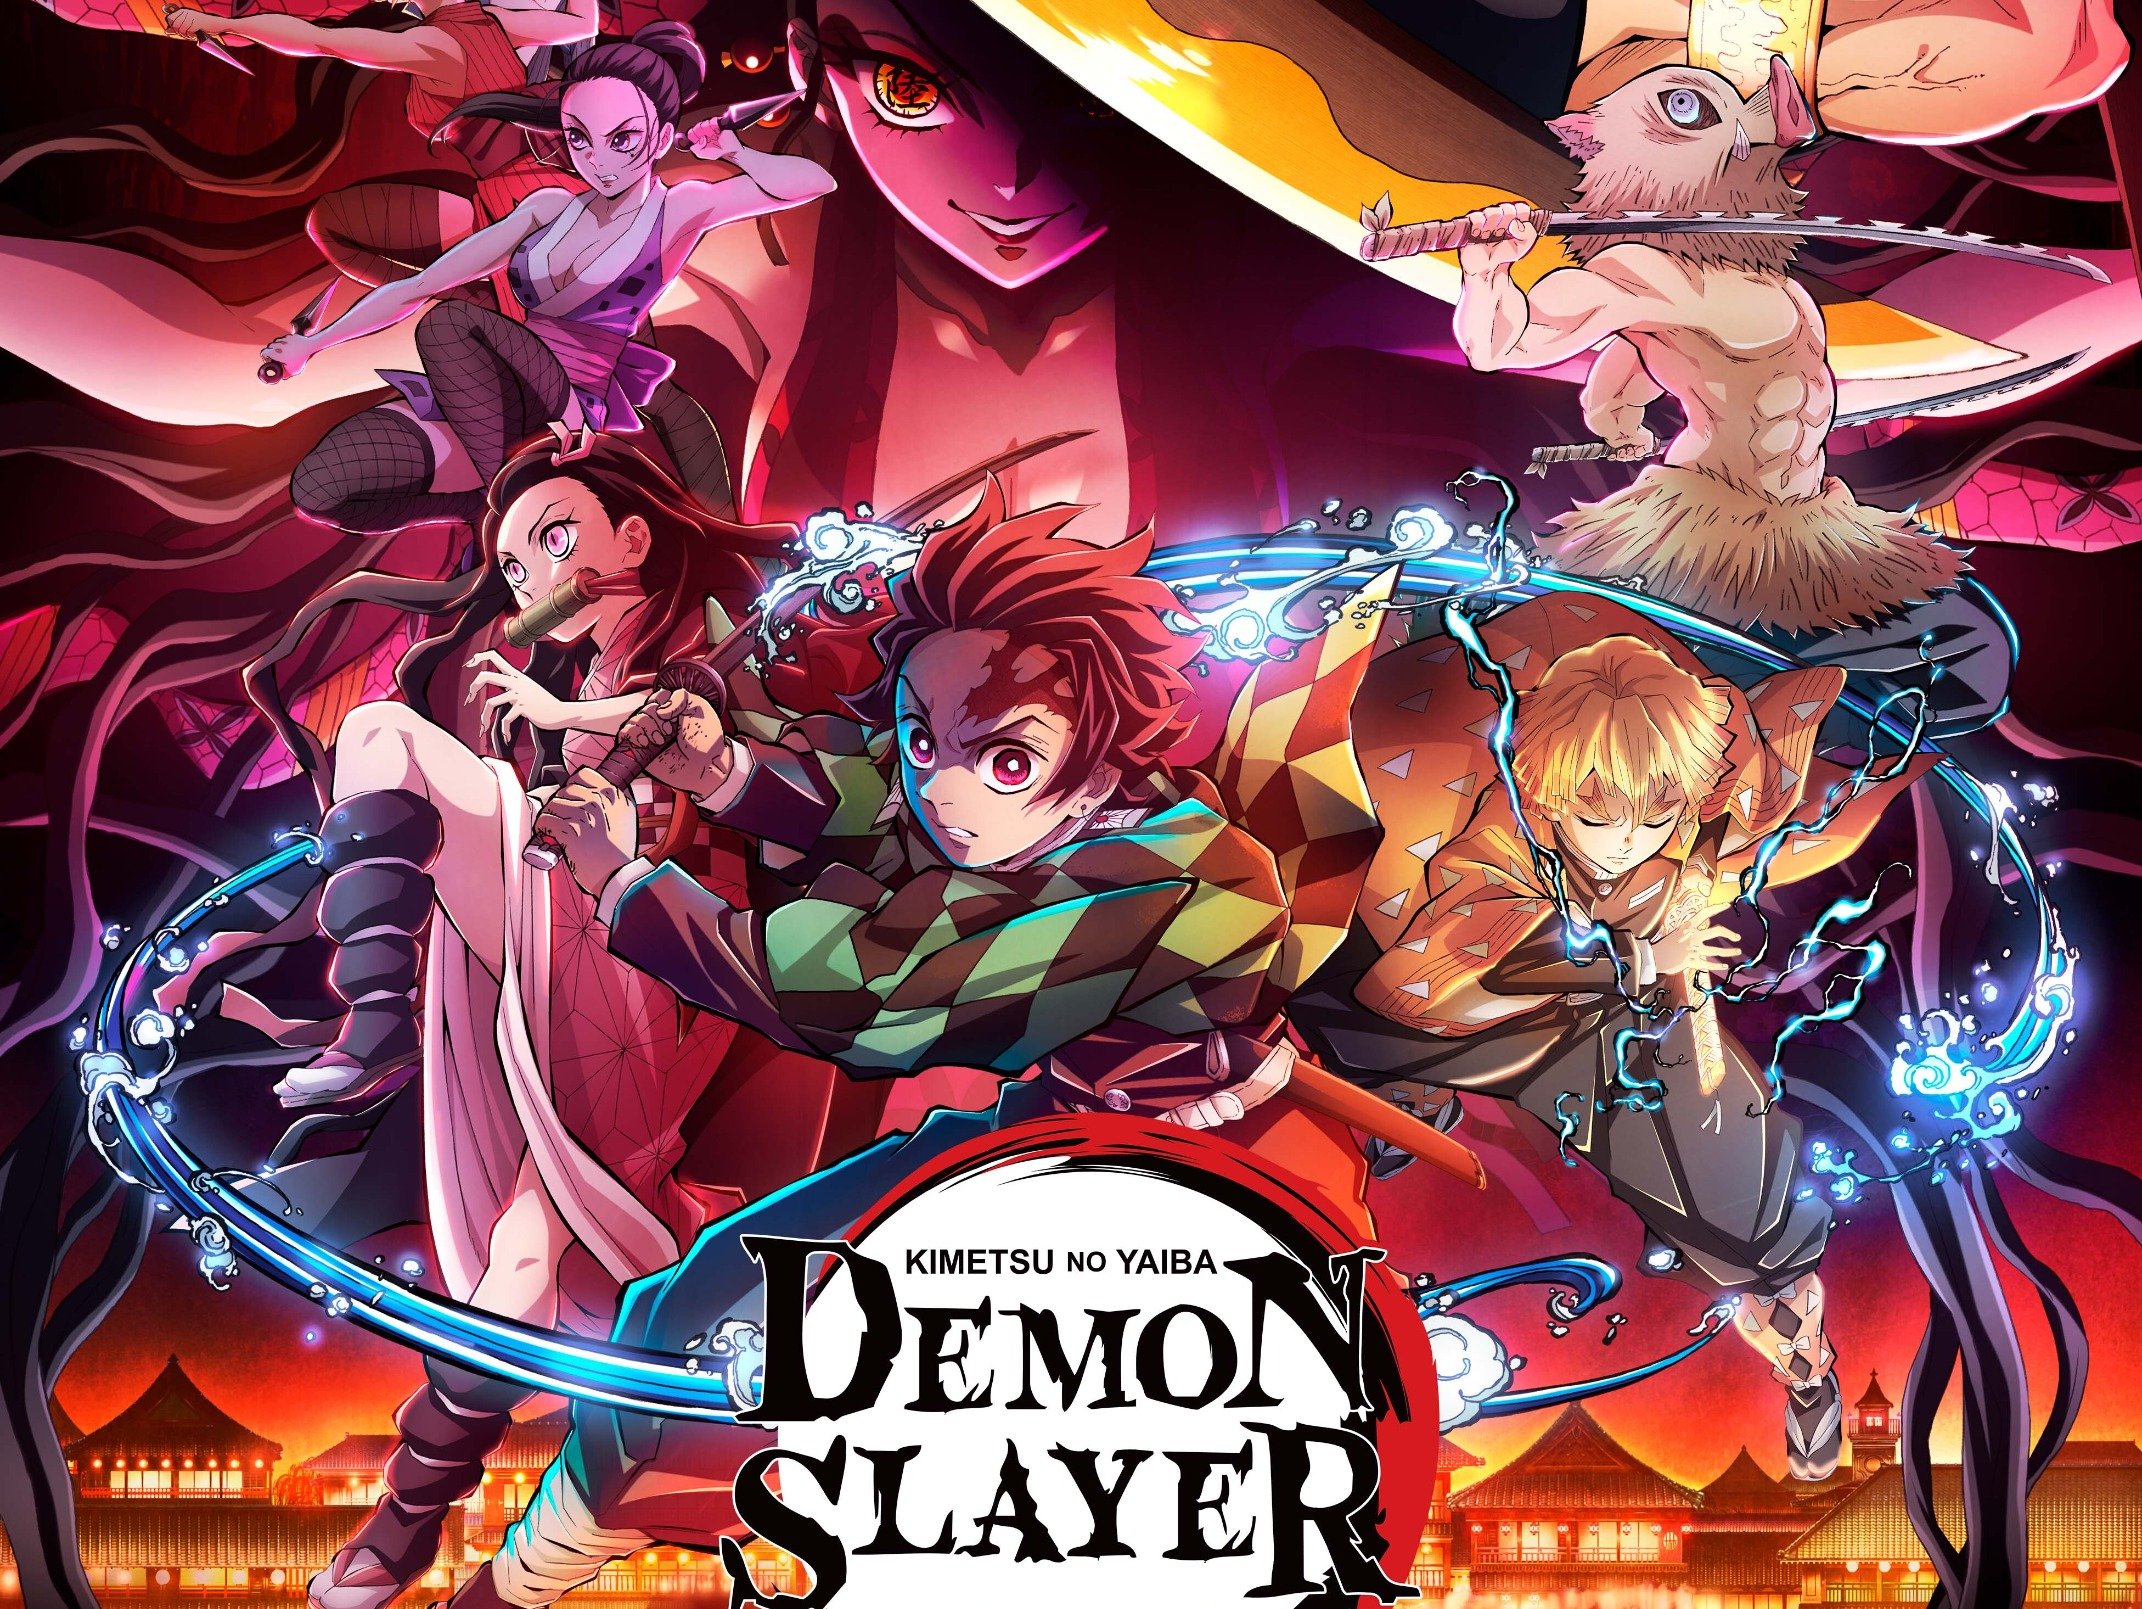 Poster art for 'Demon Slayer' Season 2, which accompanied its release date announcement. It shows the 'Demon Slayer' show characters Tanjiro in front swinging his sword and the rest of the characters behind him.